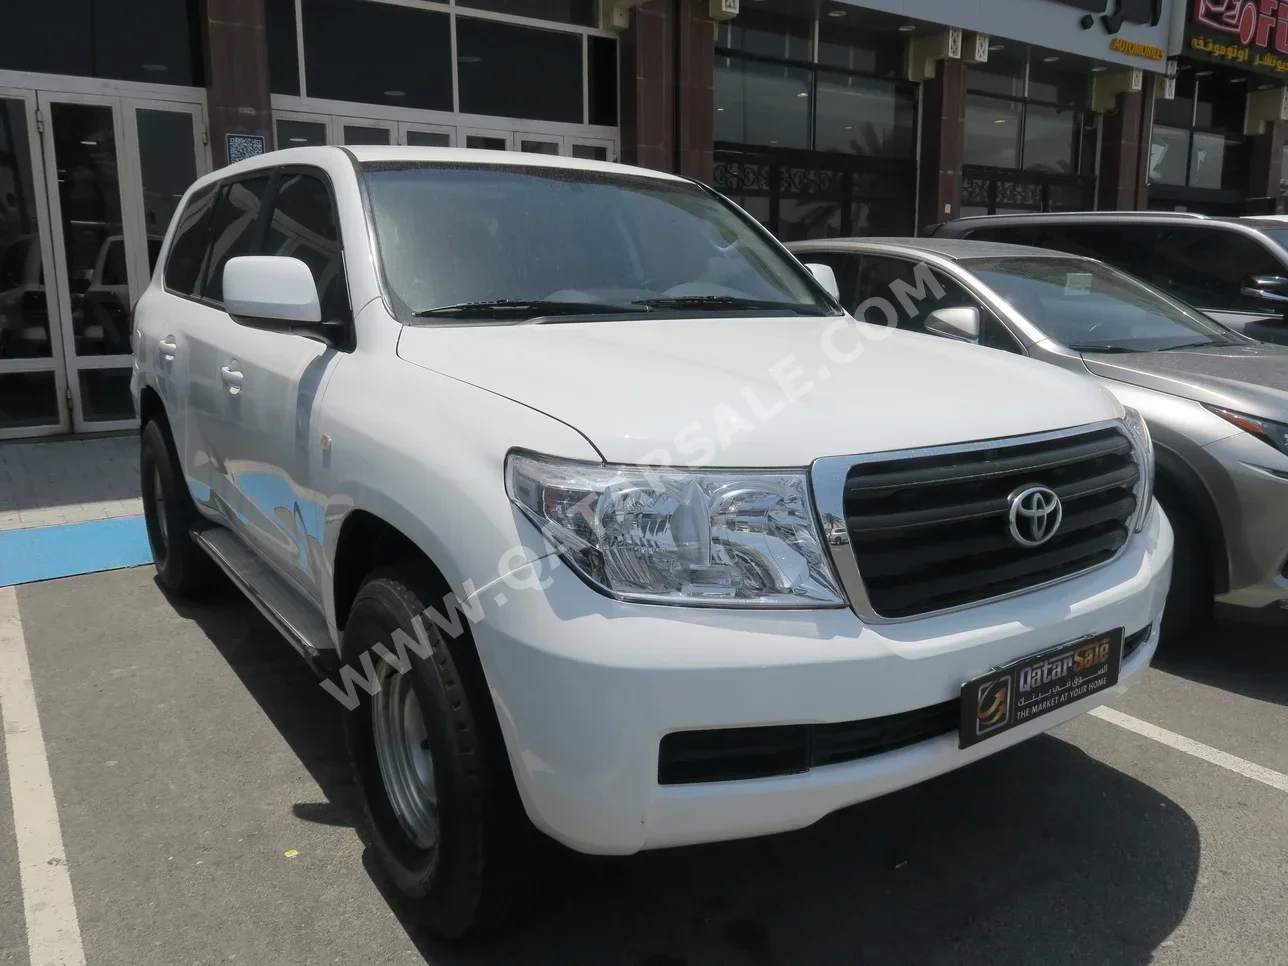 Toyota  Land Cruiser  G  2008  Automatic  360,000 Km  6 Cylinder  Four Wheel Drive (4WD)  SUV  White